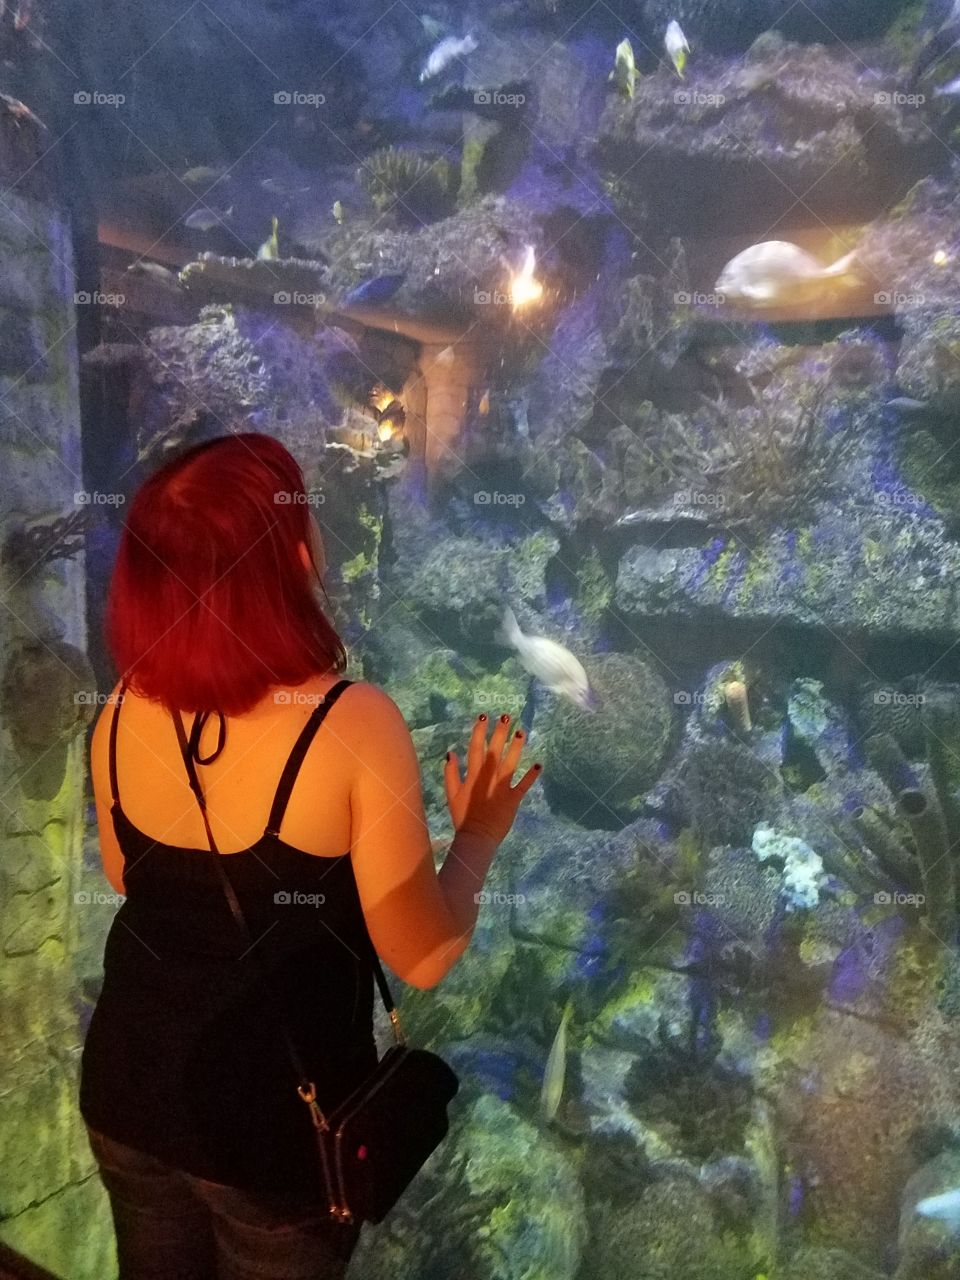 red haired girl looking into an aquarium of fish